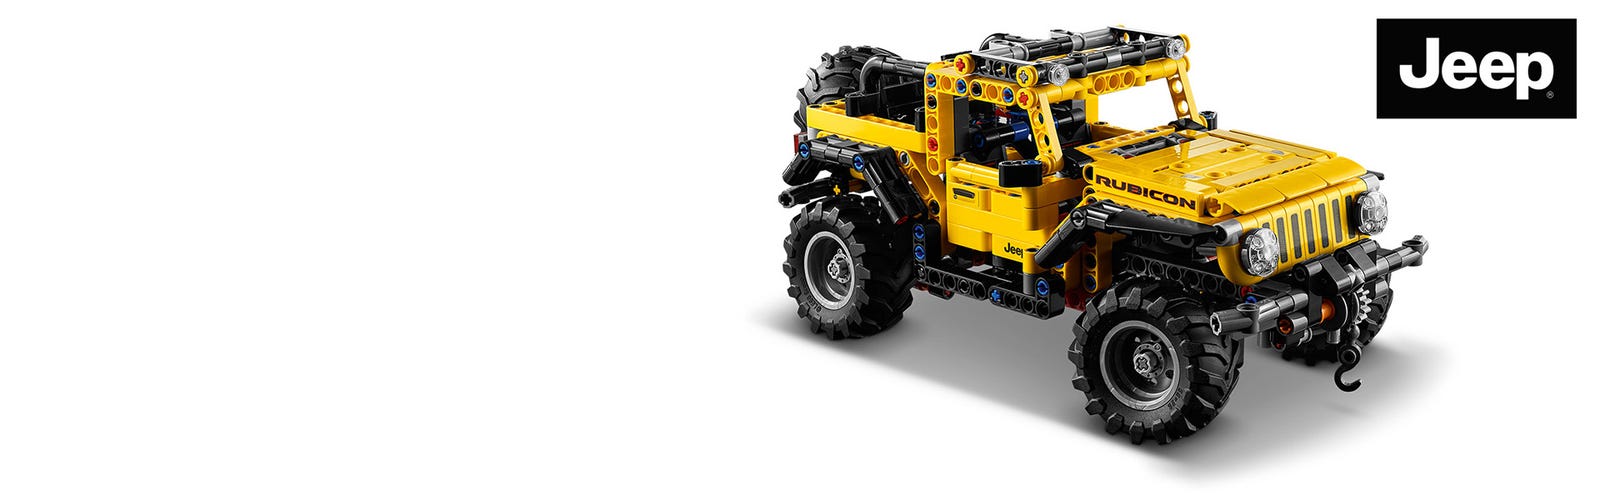 LEGO Technic 42122 Jeep Wrangler: the ultimate 4x4 to fit your